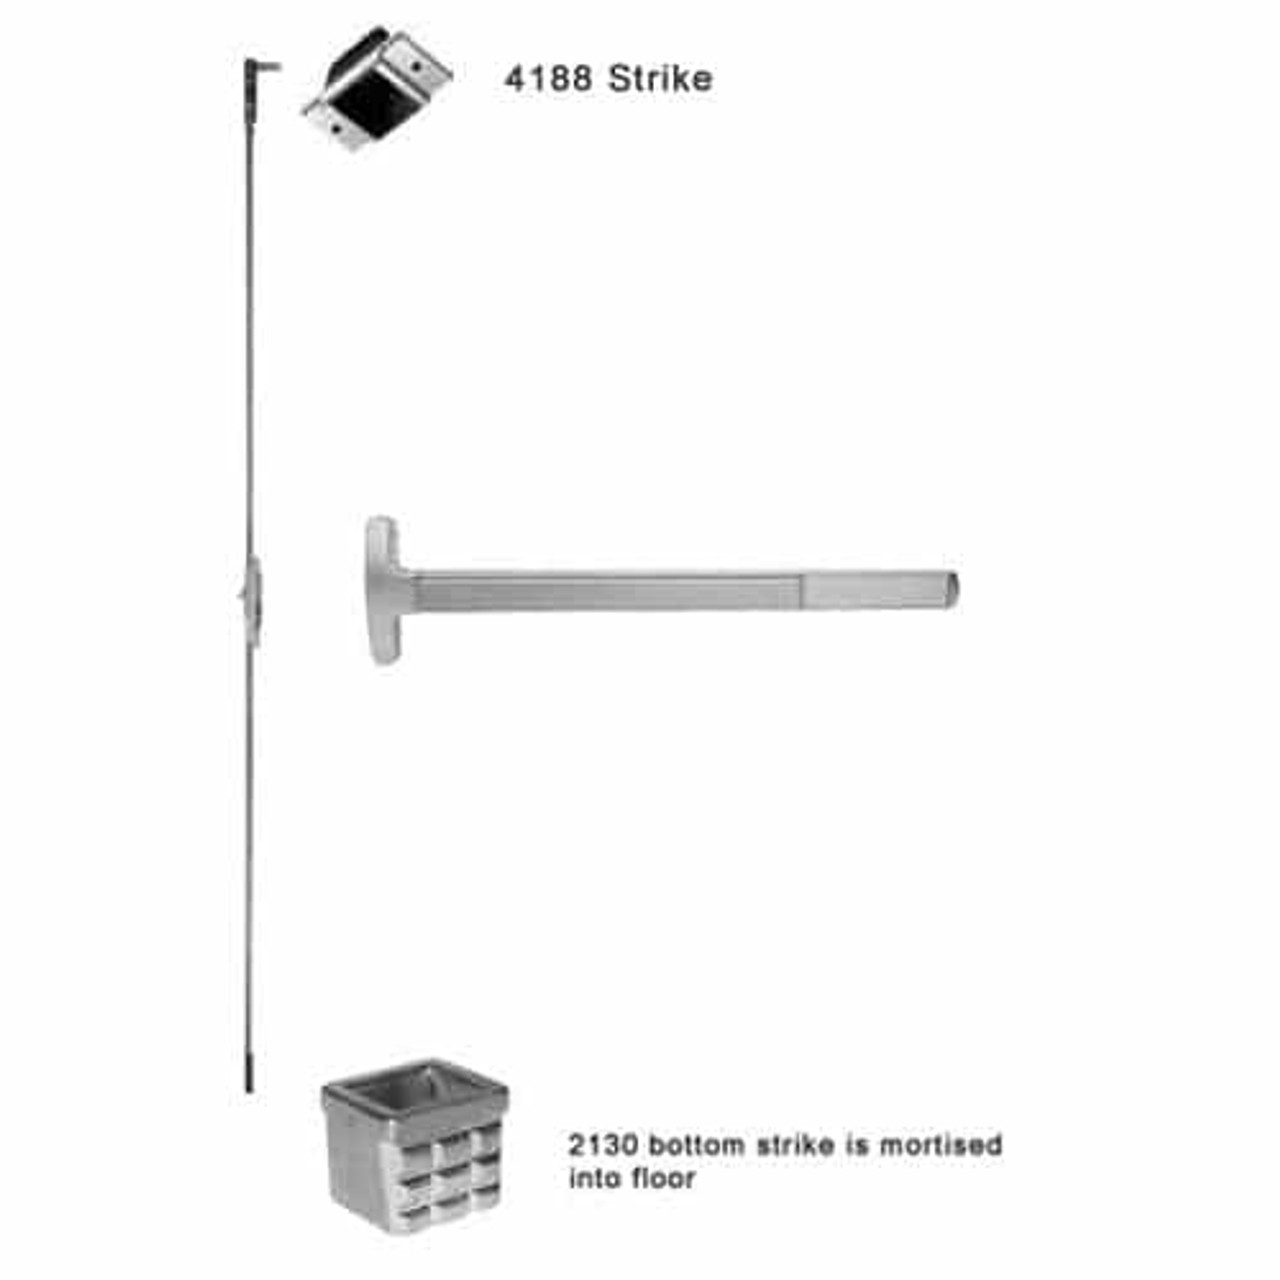 F-24-C-L-NL-DANE-US32-2-RHR Falcon 24 Series Fire Rated Concealed Vertical Rod Device 712L-NL Dane Lever with Night Latch Trim in Polished Stainless Steel